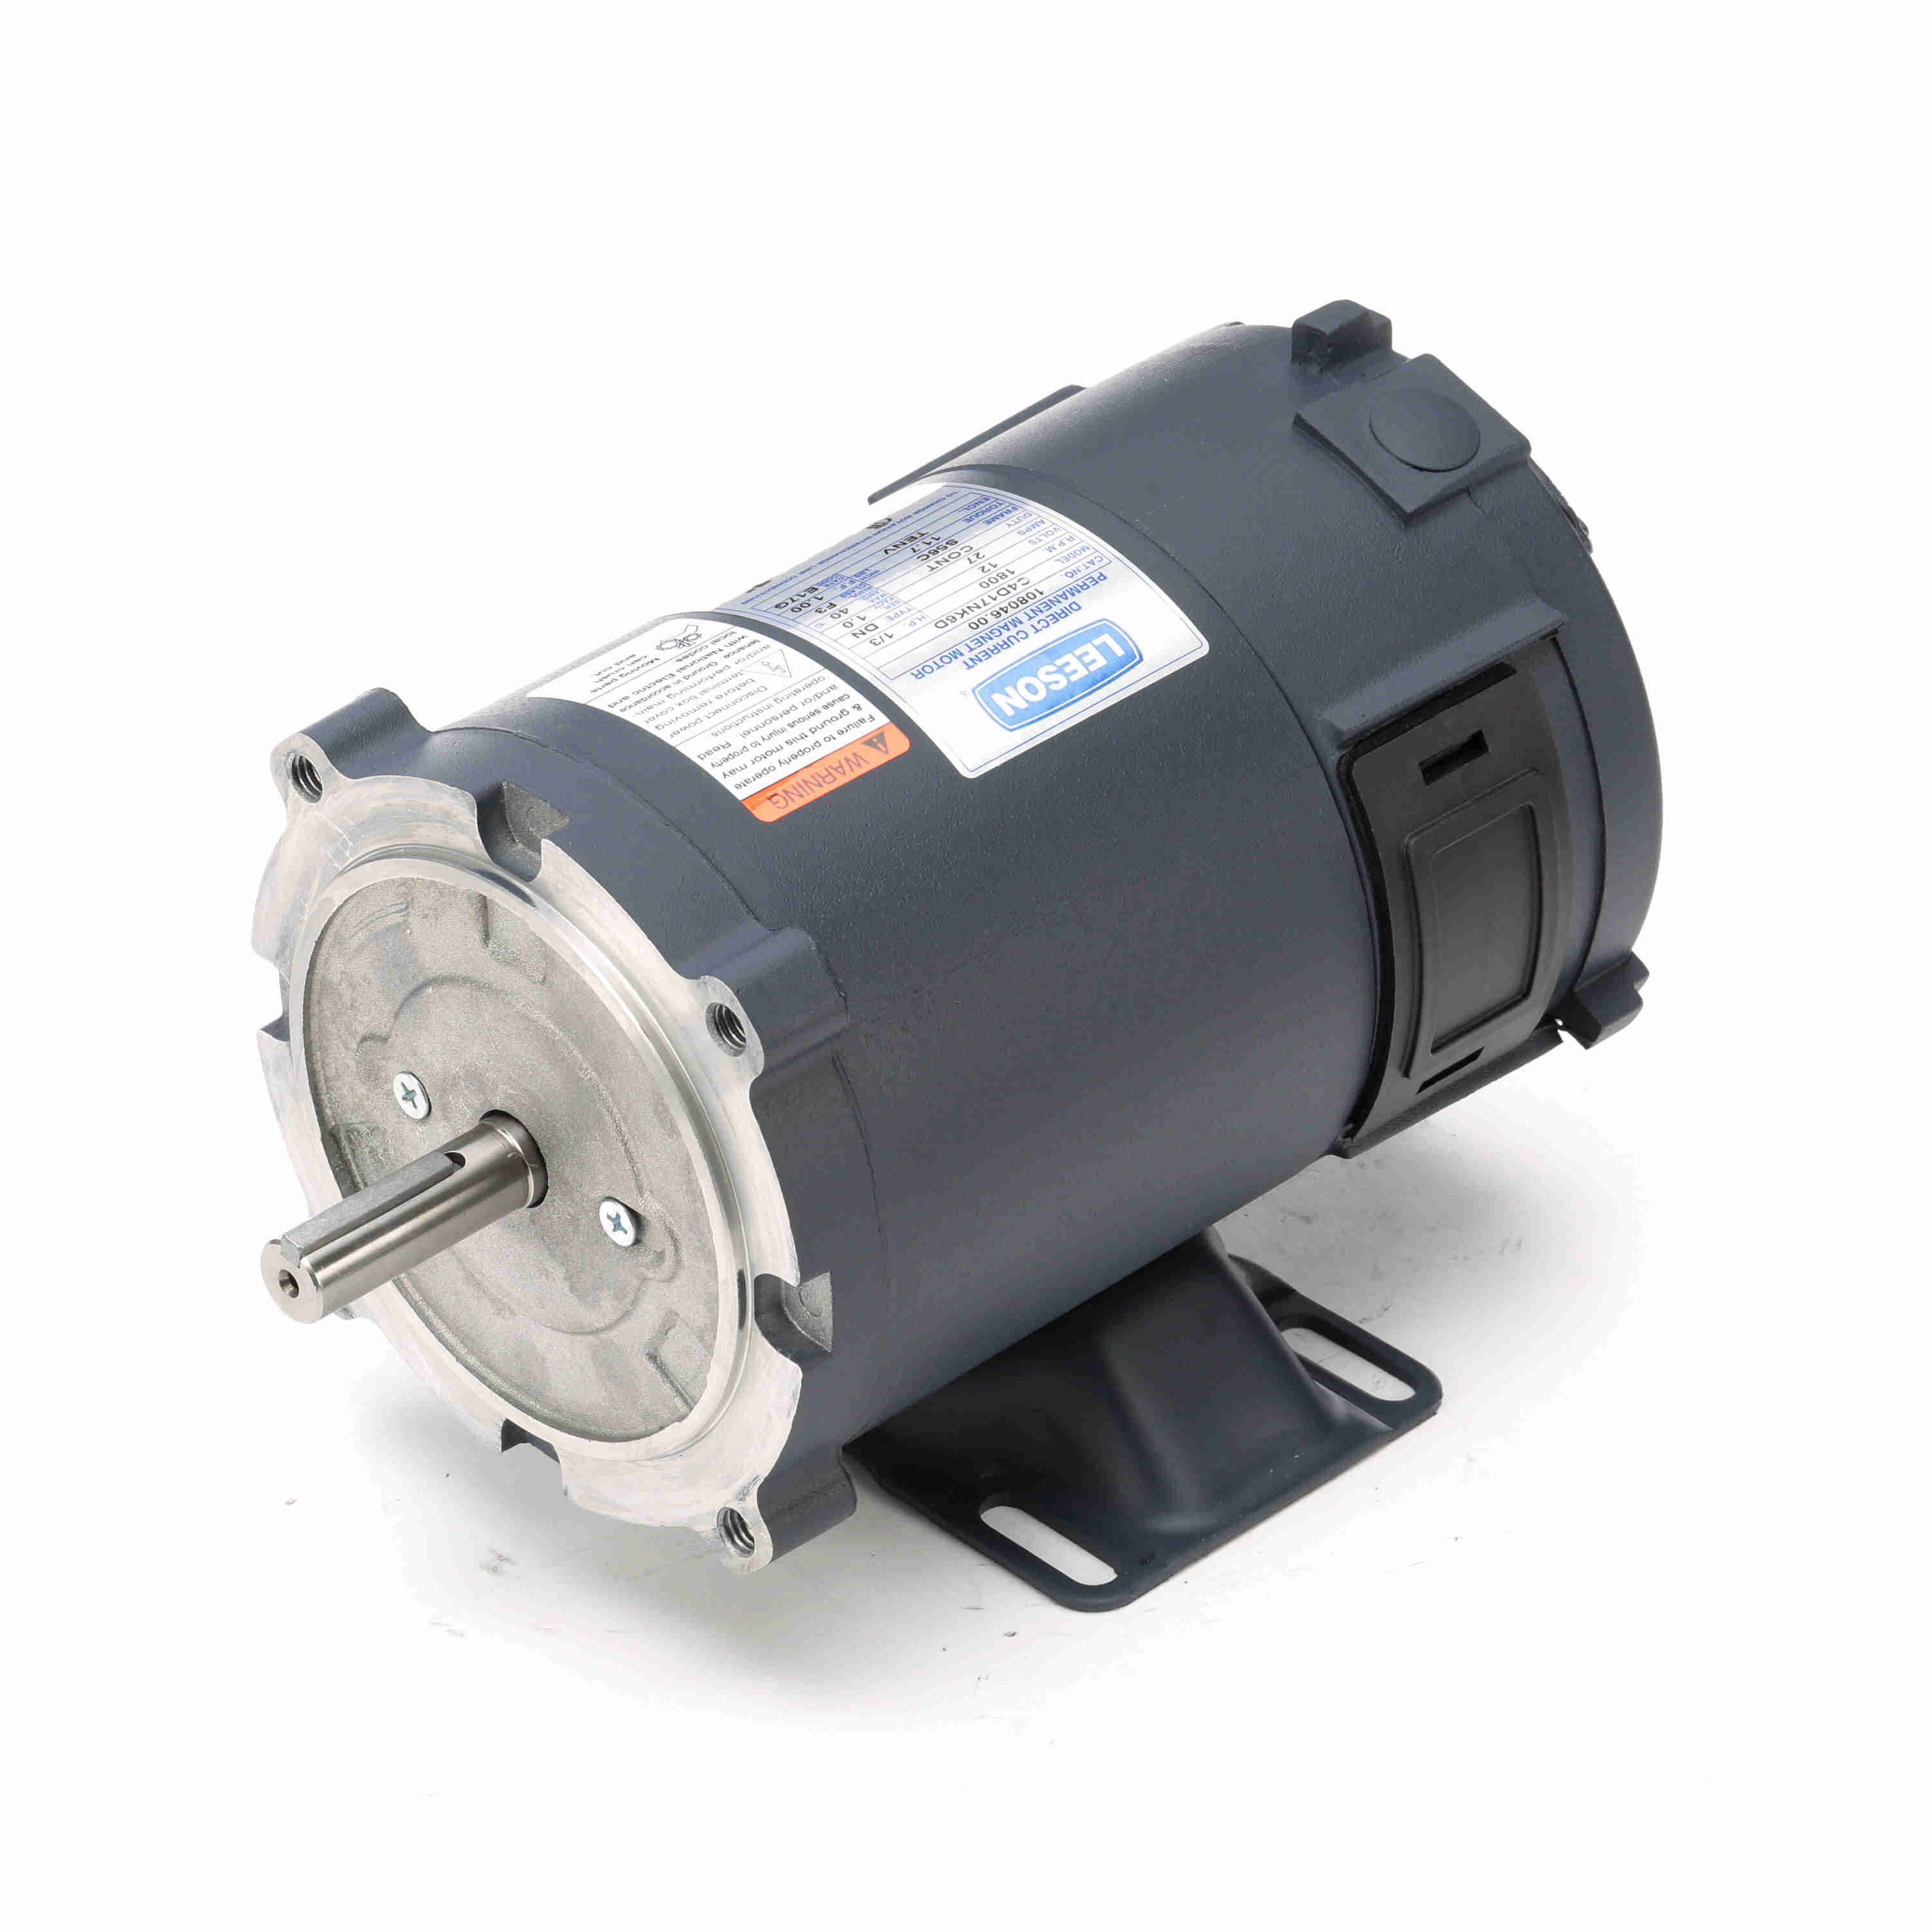 108046.00 Leeson 1/3HP Low Voltage DC Electric Motor, 1800RPM 2